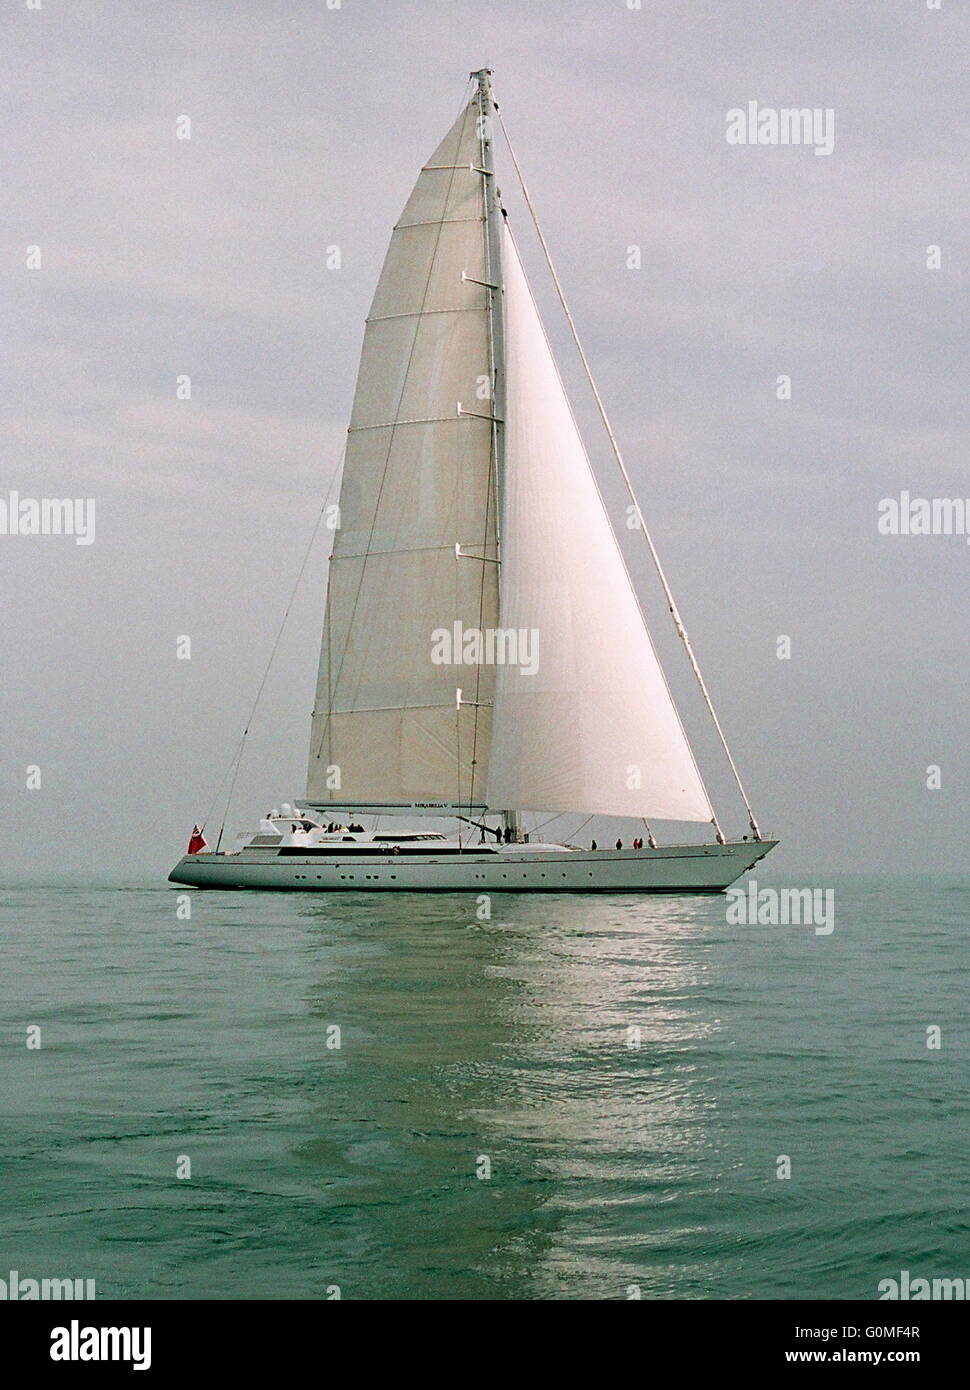 AJAX NEWS PHOTOS.13TH APRIL 2004. SOLENT, ENGLAND. - FIRST BOW - WORLD'S LARGEST SINGLE MASTED SAILING YACHT, MIRABELLA V - BUILT BY VOSPER THORNYCROFT FOR AMERICAN JOE VITTORIA - UNDER WAY SOUTH OF THE ISLE OF WIGHT. THE 245FT (75.2M) LONG YACHT HAS A  290FT (88.5M) TALL MAST;  SHE CAN CARRY UP 36,490 SQ FT (3,400 SQ M) SQ METERS OF SAIL. PHOTO:JESSICA EASTLAND/AJAX.   REF: MIRA/41304 6 Stock Photo